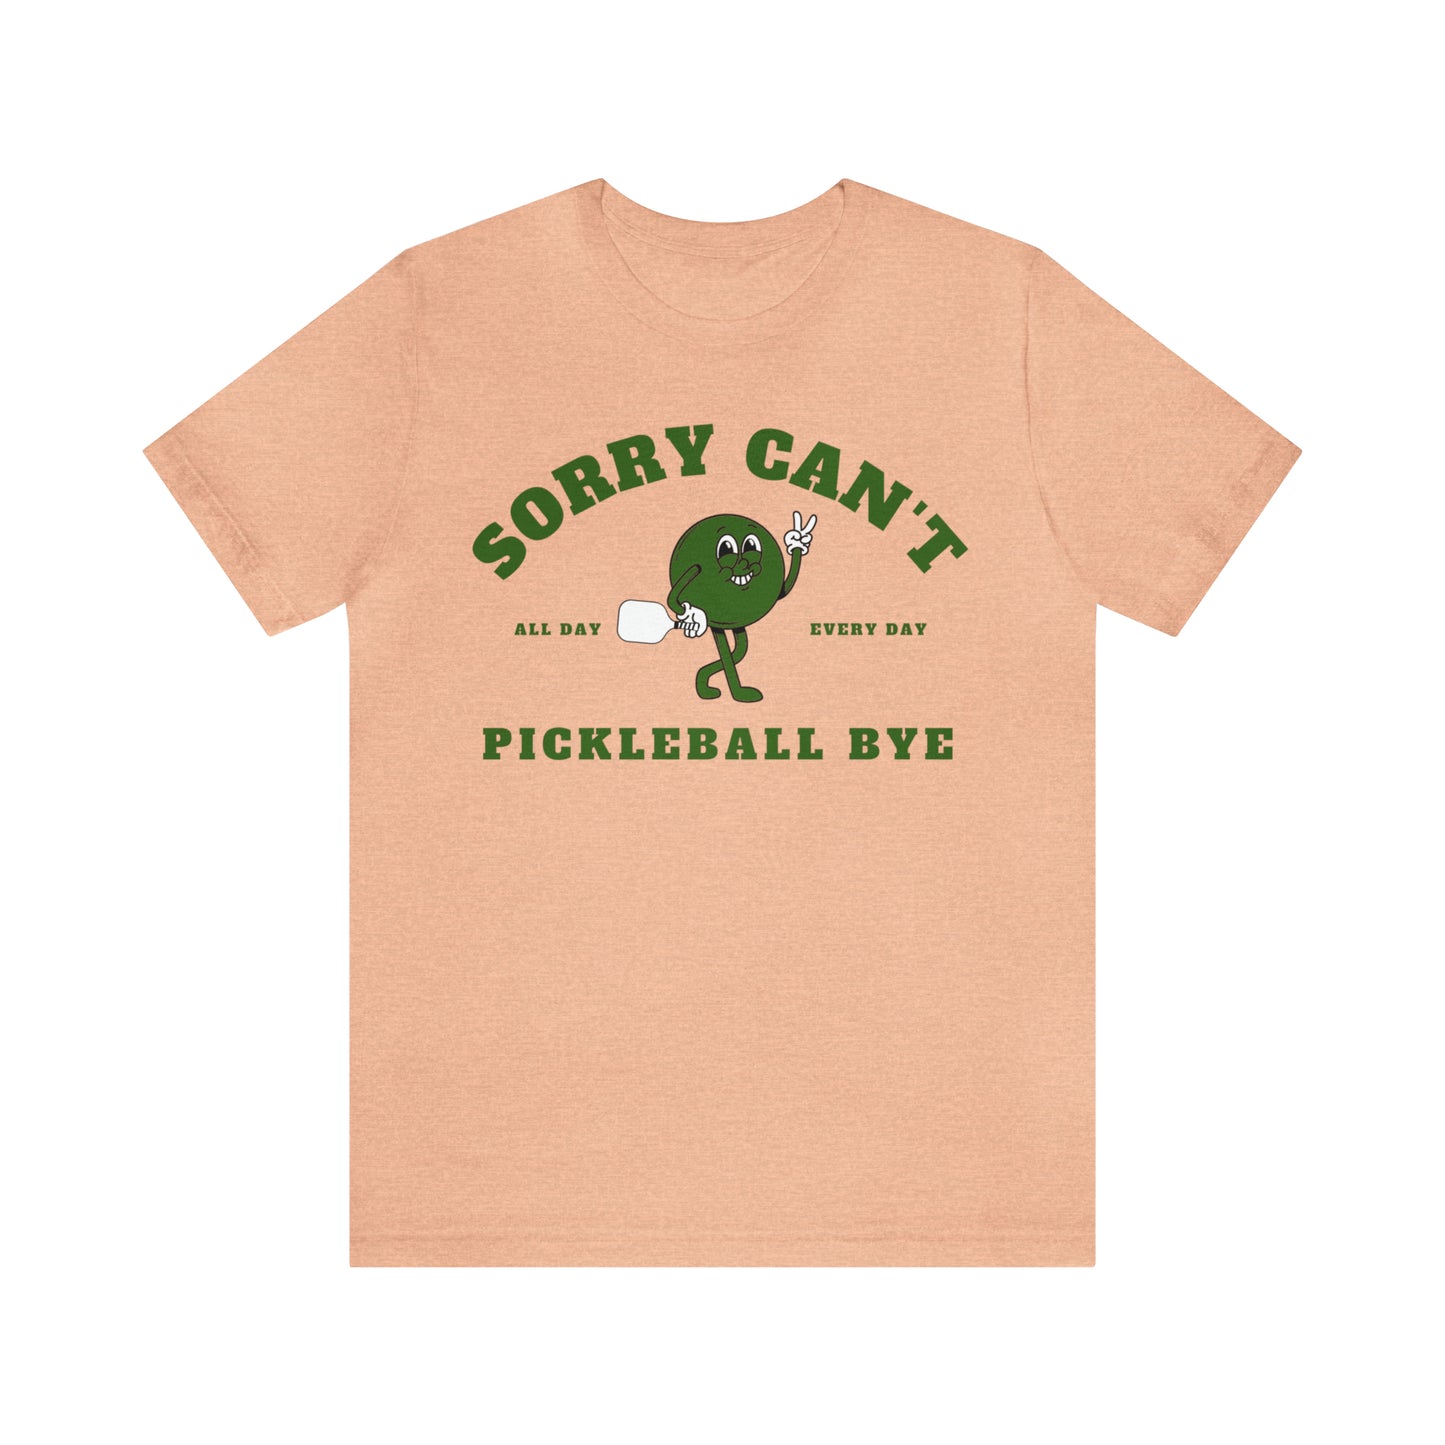 Sorry Can't Pickleball Bye - All Day Every Day